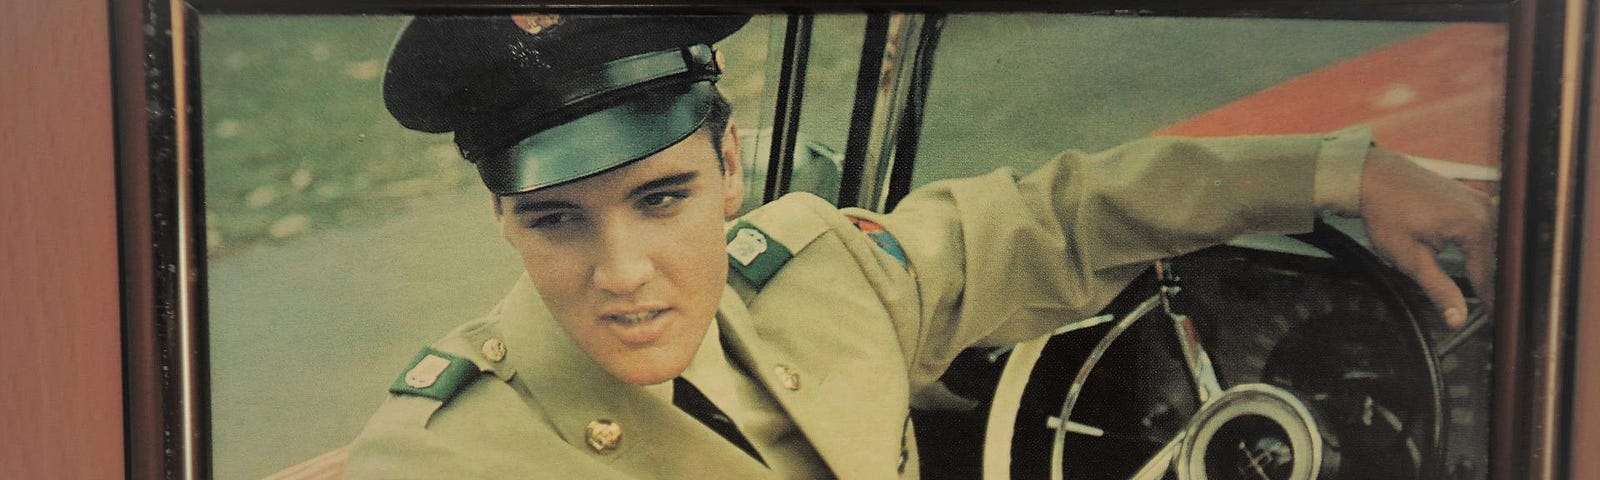 Framed photograph of Elvis Presley sitting in a car in his Army uniform.